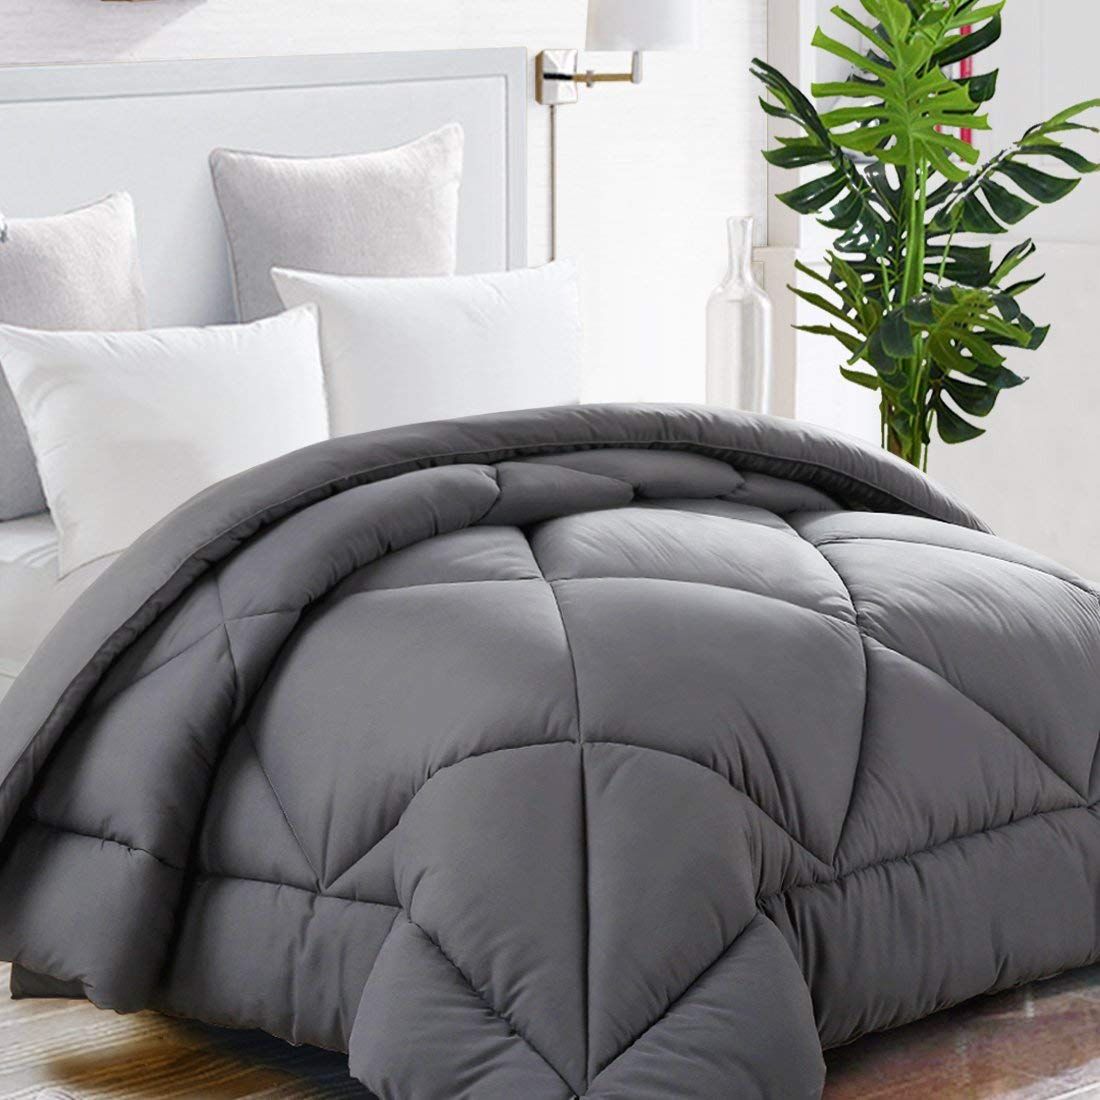 17 Best Comforters On 2021 The, King Comforter Too Small For King Bed